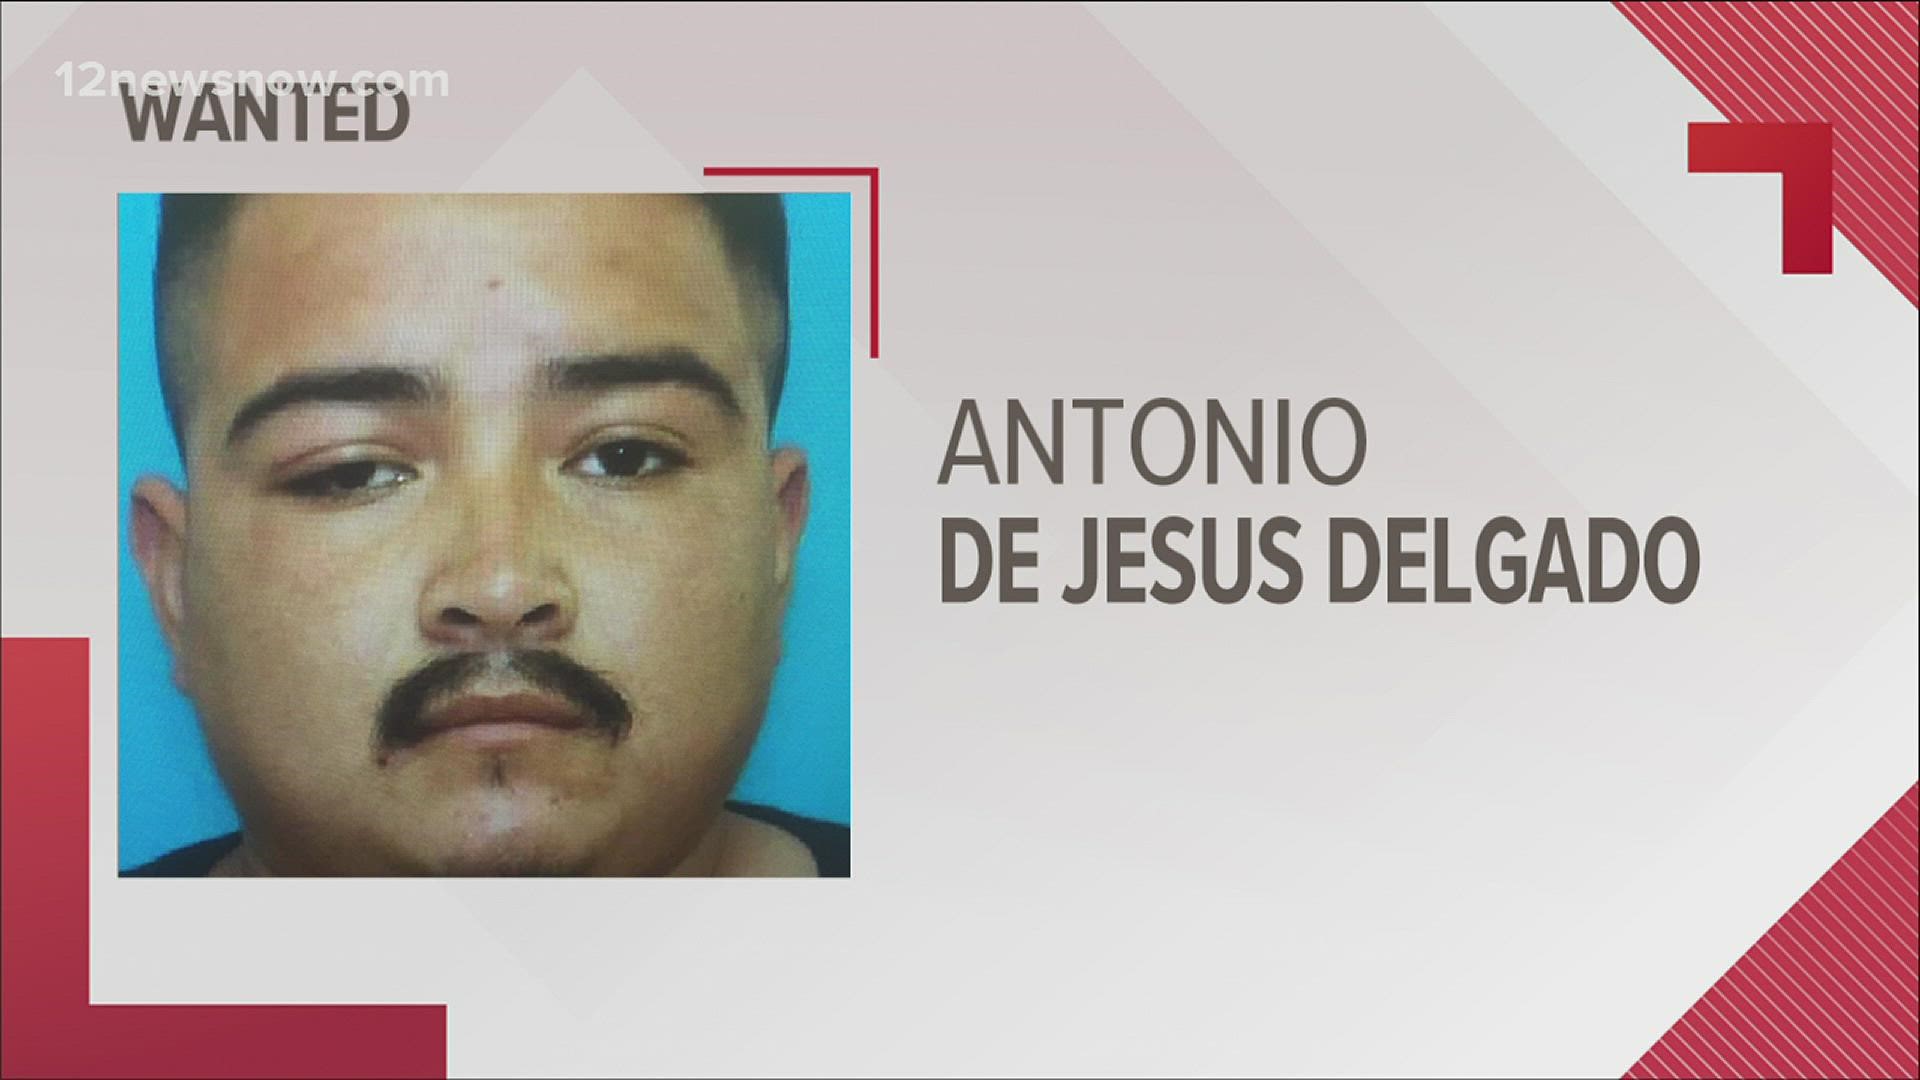 Beaumont Police said they have not seen Antonio Delgado since he checked out of a Beaumont hospital about week after the fatal crash.